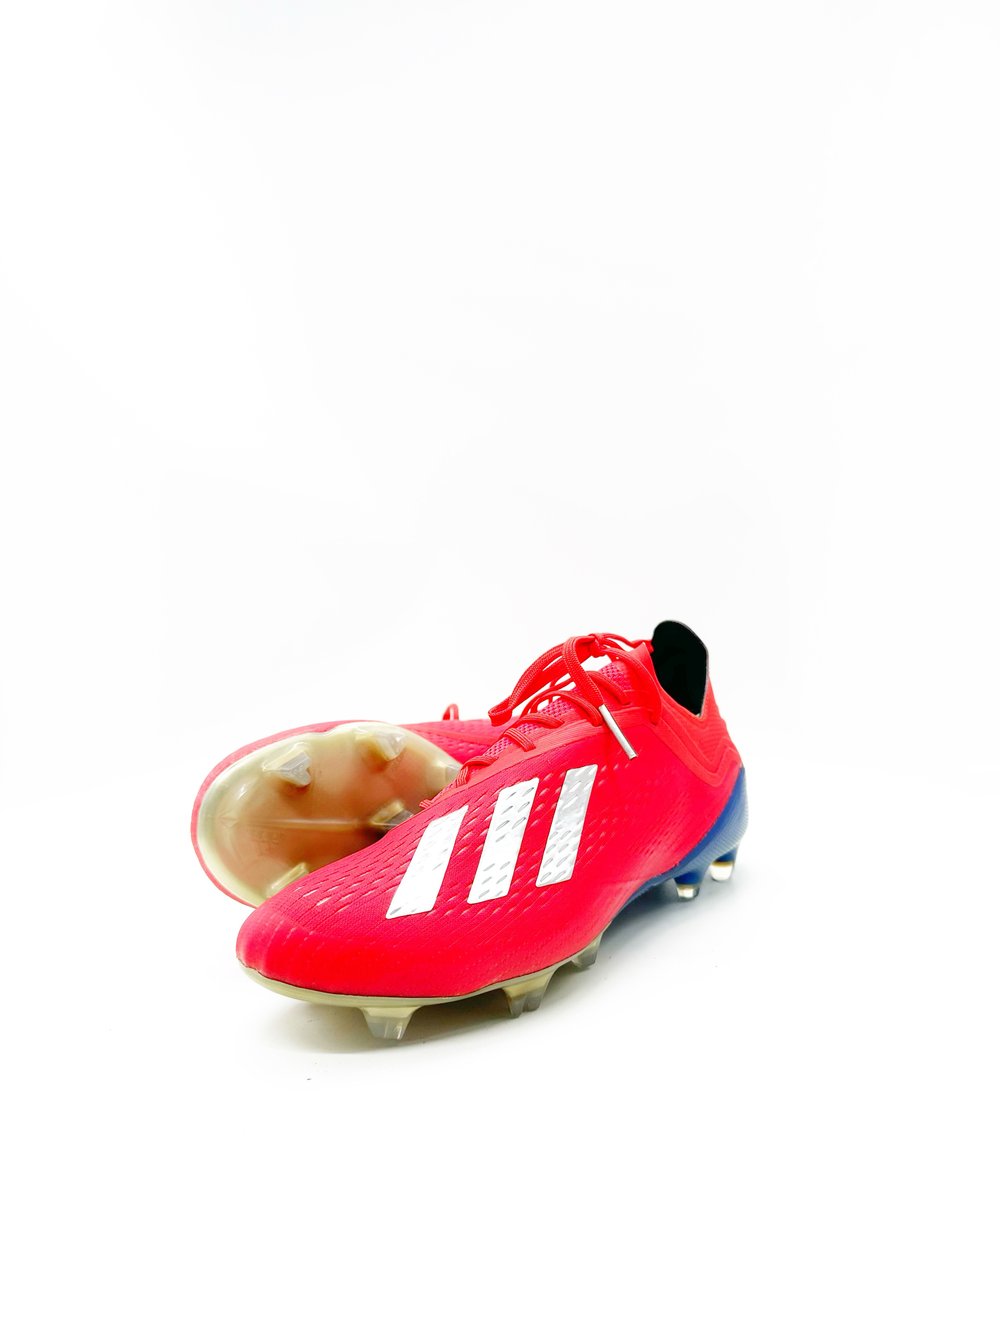 Image of Adidas 18.1 FG Made In Germany